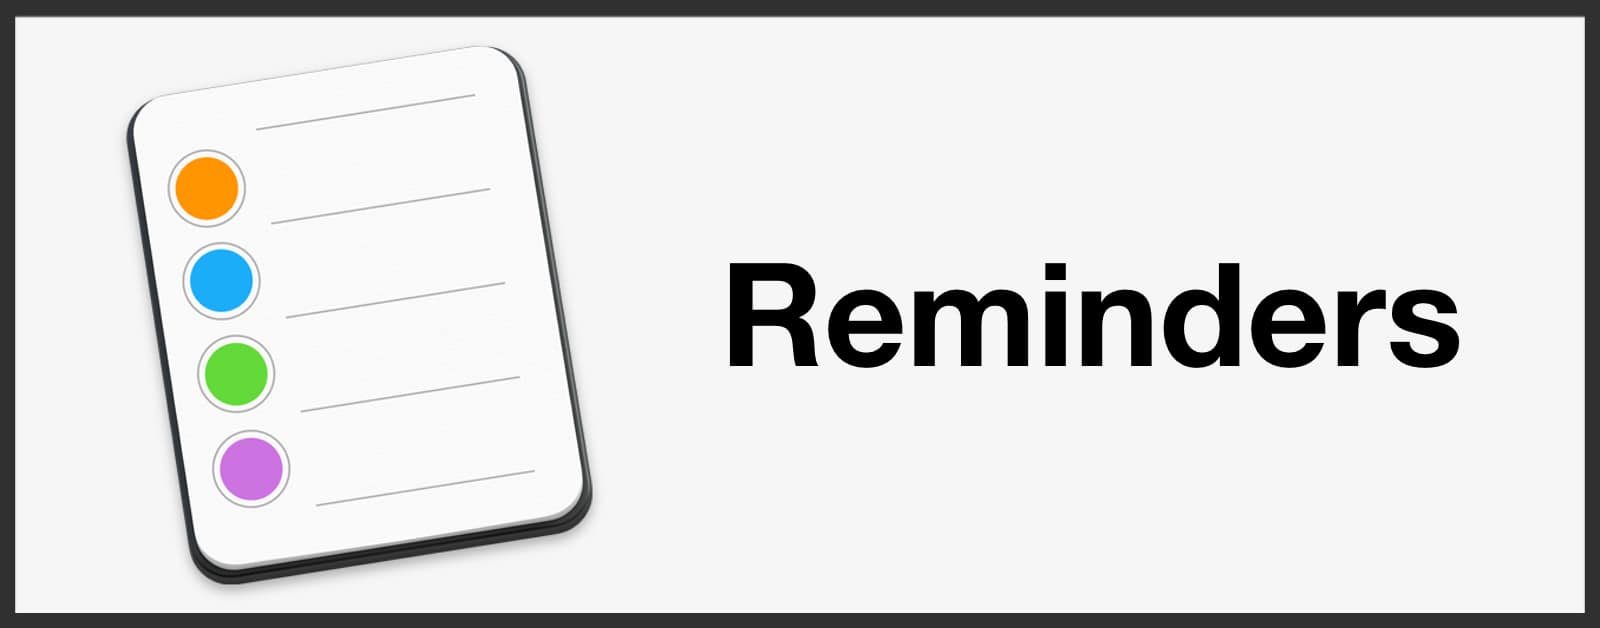 macOS: Automatically Format Reminders With Date And Time